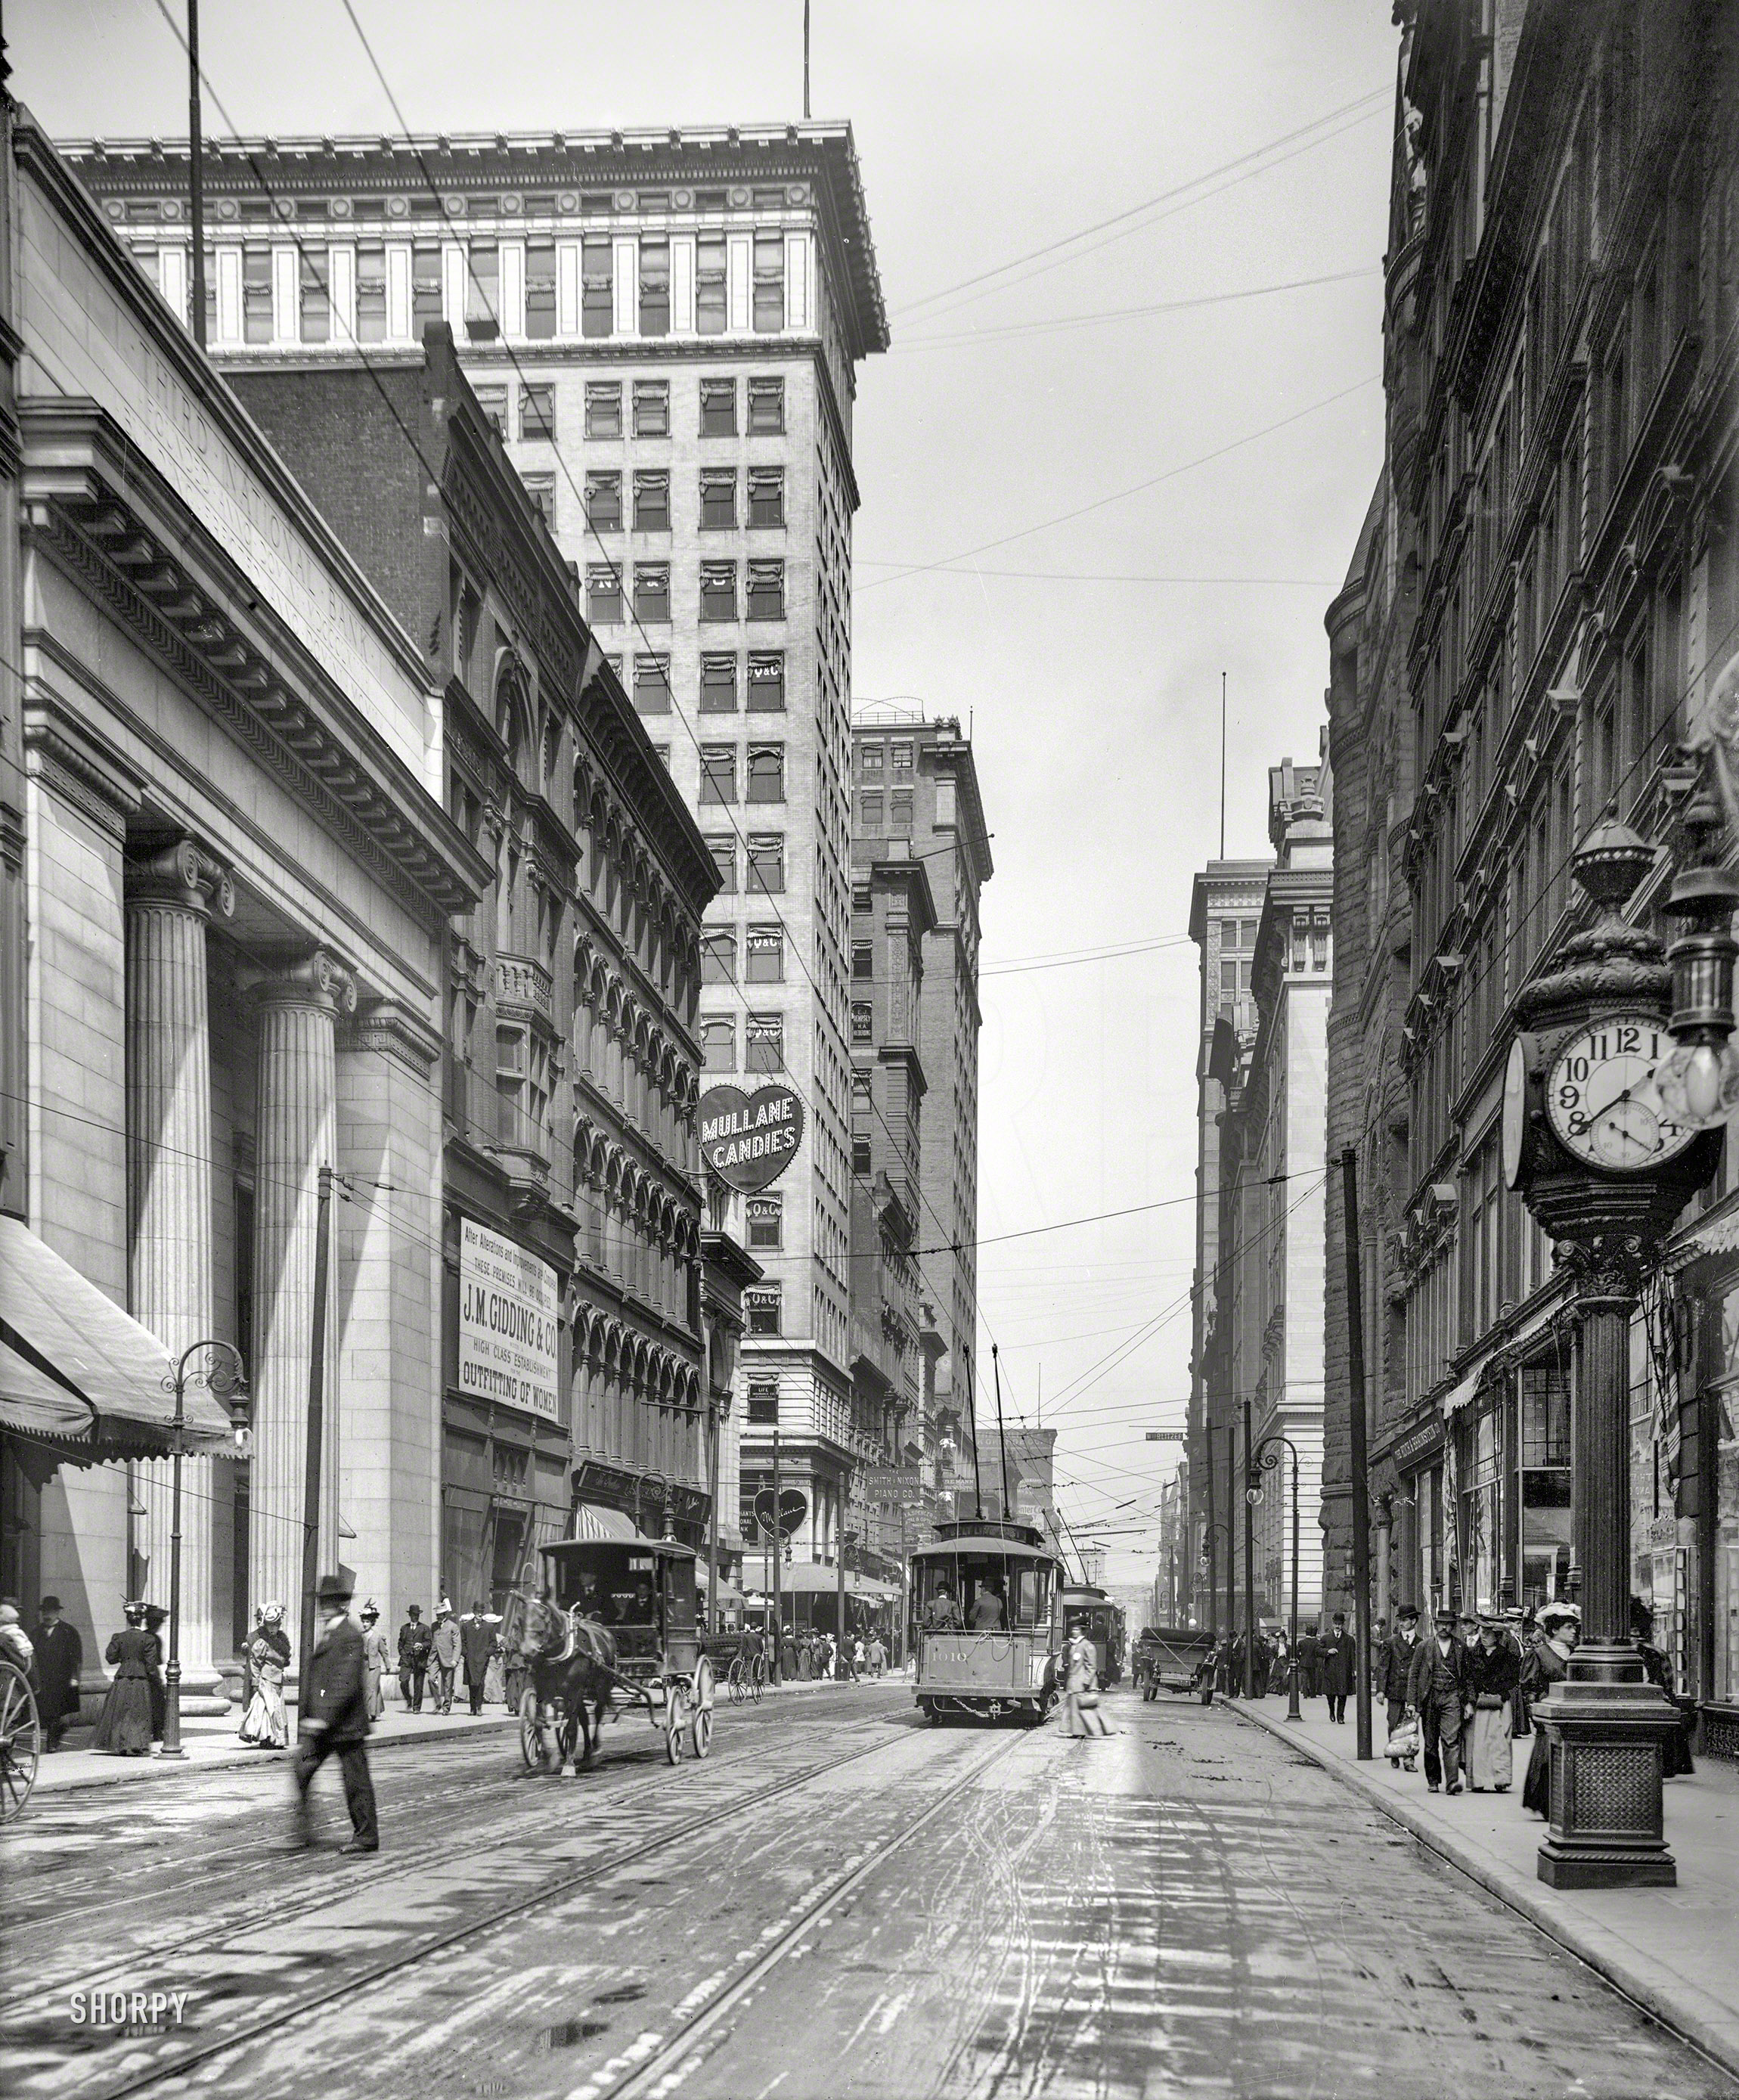 Circa 1907. "Fourth Street, Cincinnati, Ohio." Where the brands vying for your trade include Mullane and Wurlitzer.  8x10 glass negative. View full size.